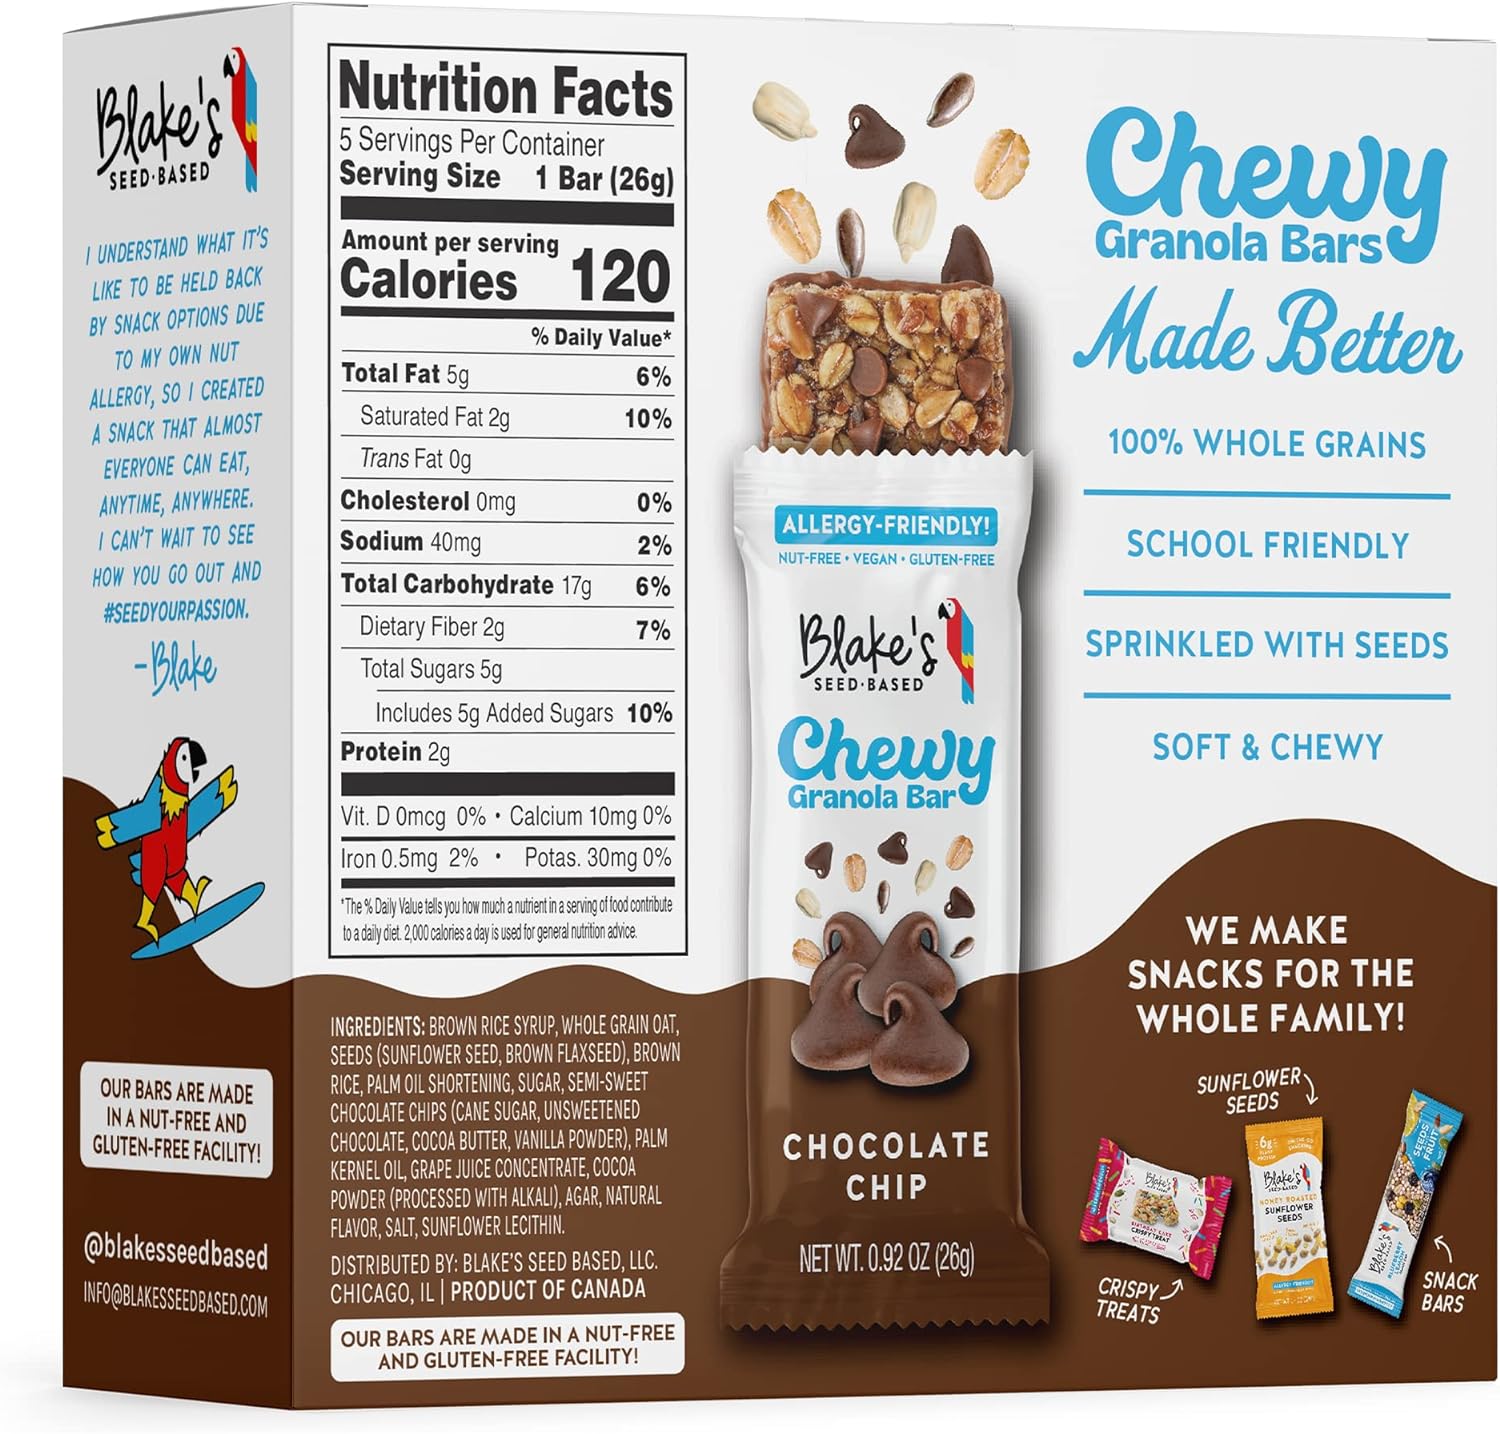 Blake’s Seed Based Chewy Granola Bars — Chocolate Chip (5 Count), Vegan, Gluten Free, Nut Free & Dairy Free, Healthy Snacks for Kids or Adults, School Safe, Low Calorie Soy Free Snack